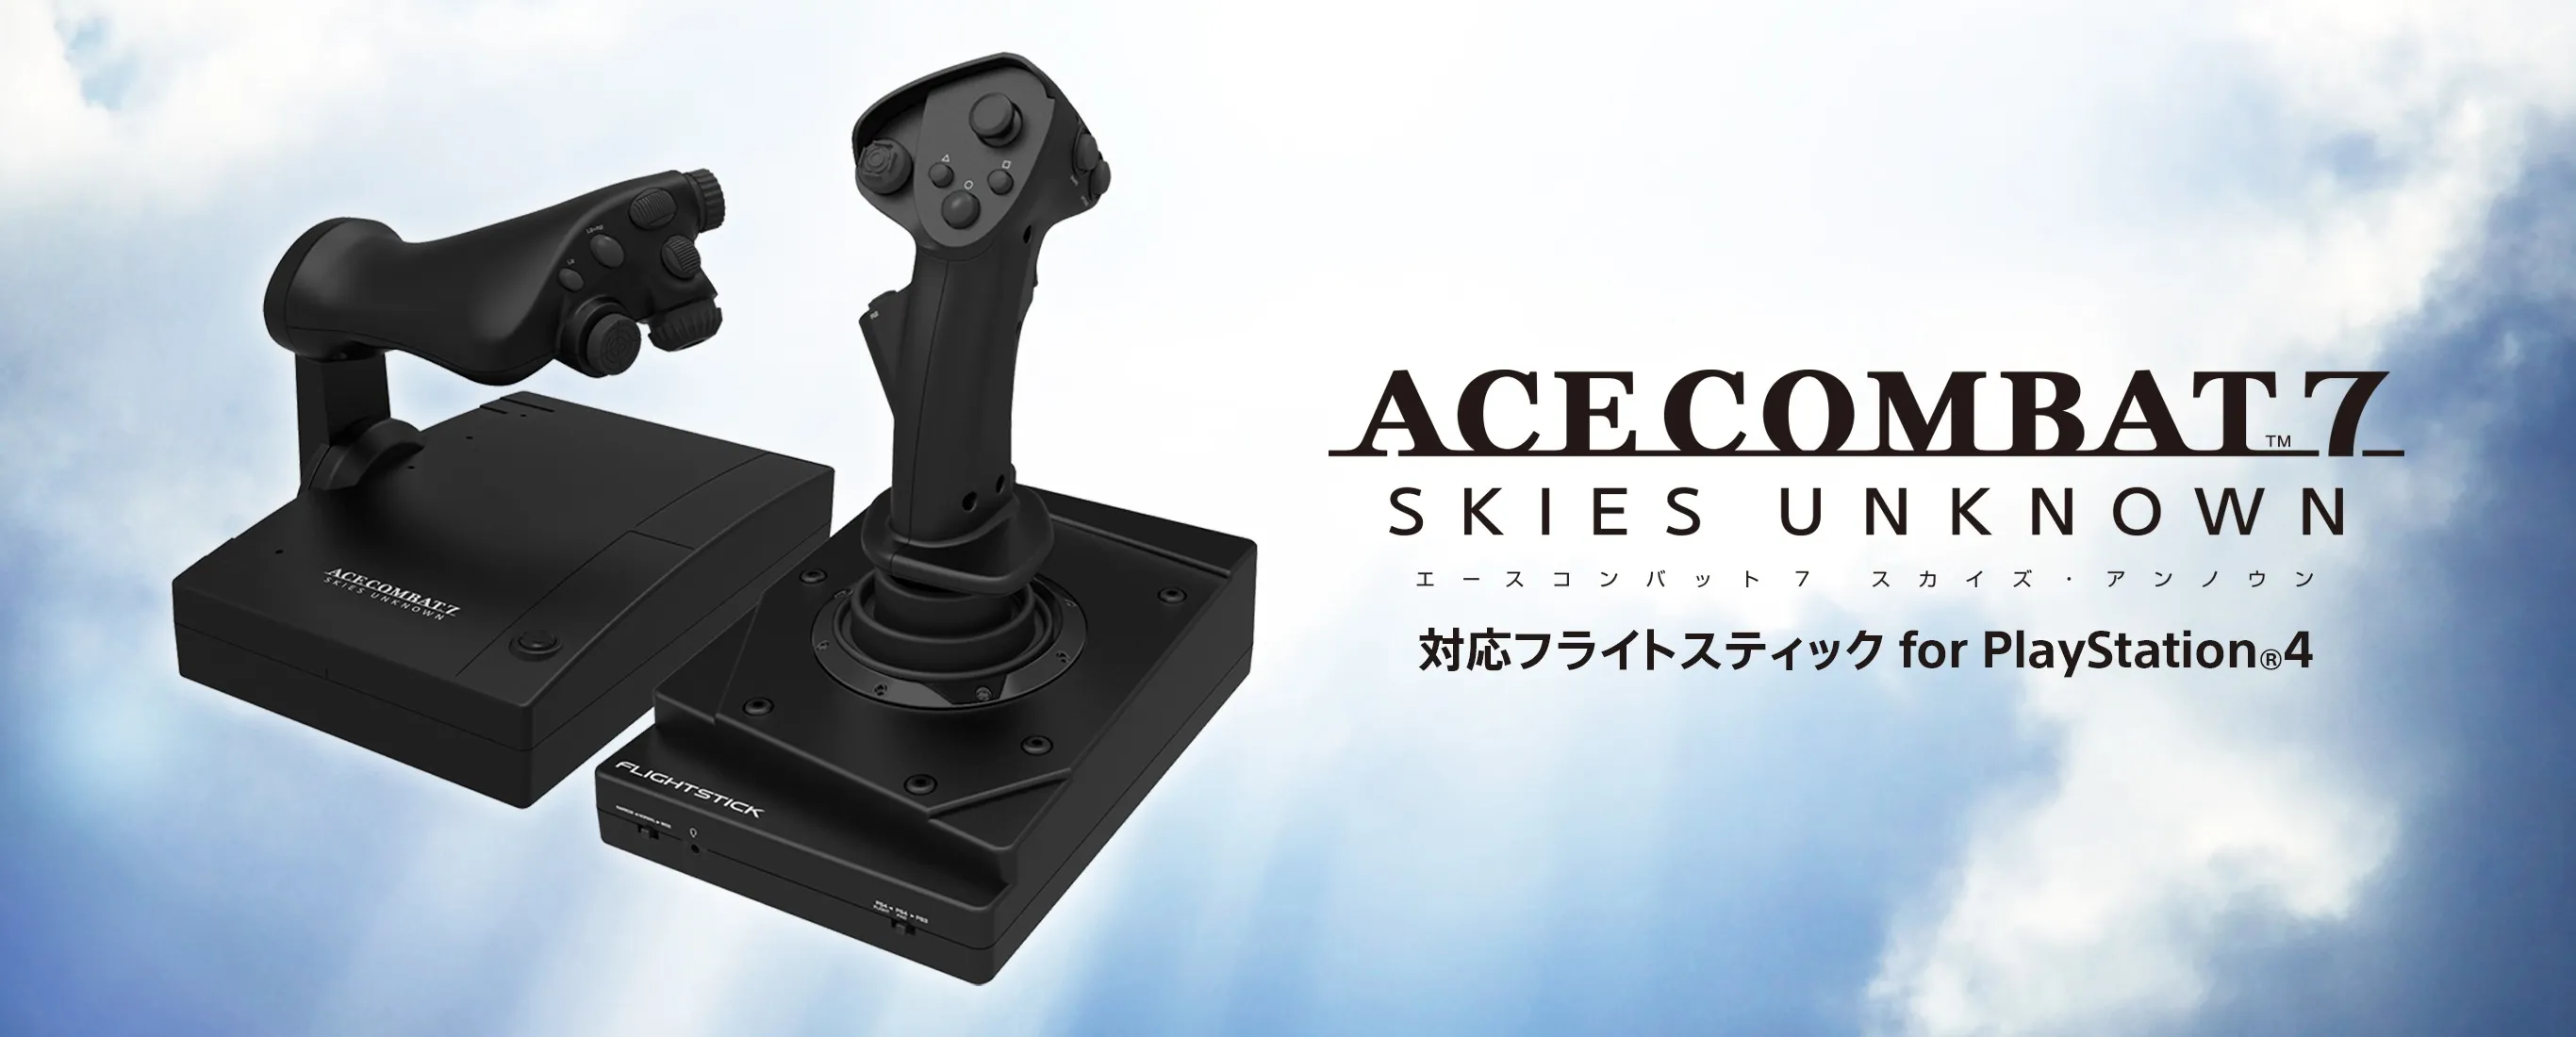 Karu T Haringen Take A Look At The Two Flight Sticks Announced For Ace Combat 7 - Siliconera